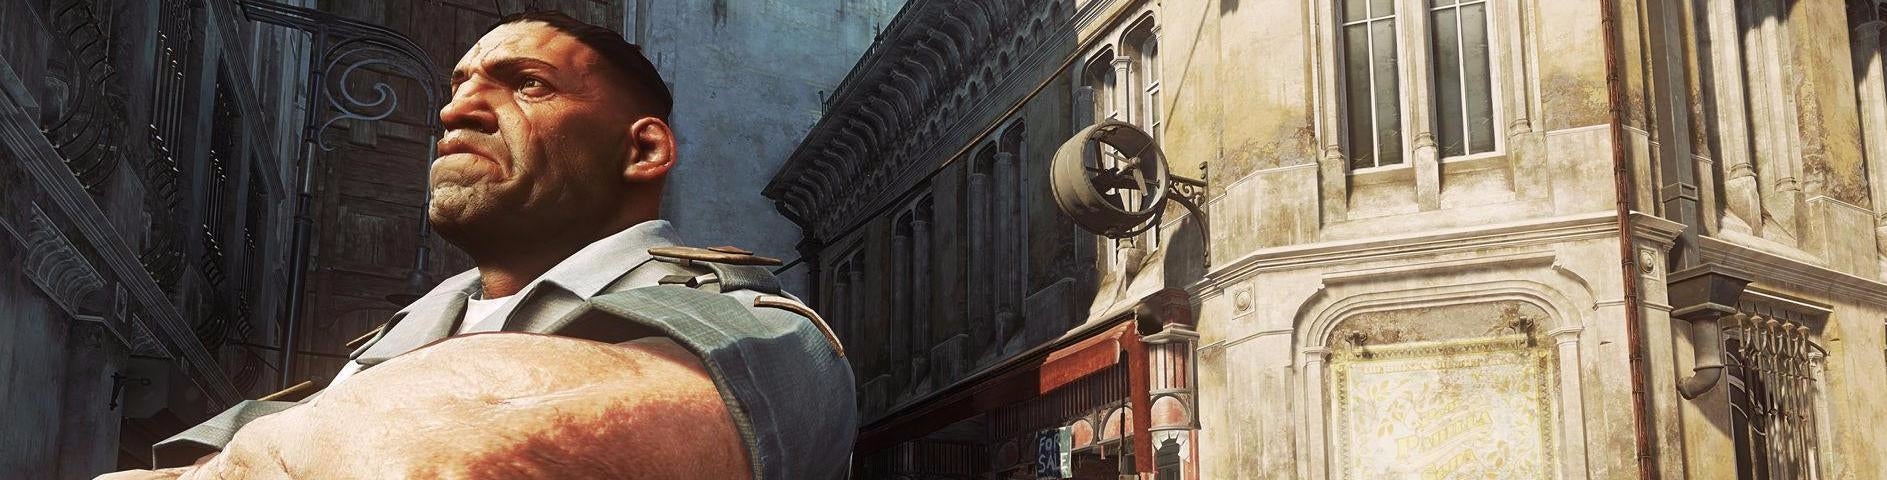 Image for Dishonored 2 and the infuriating pursuit of perfection